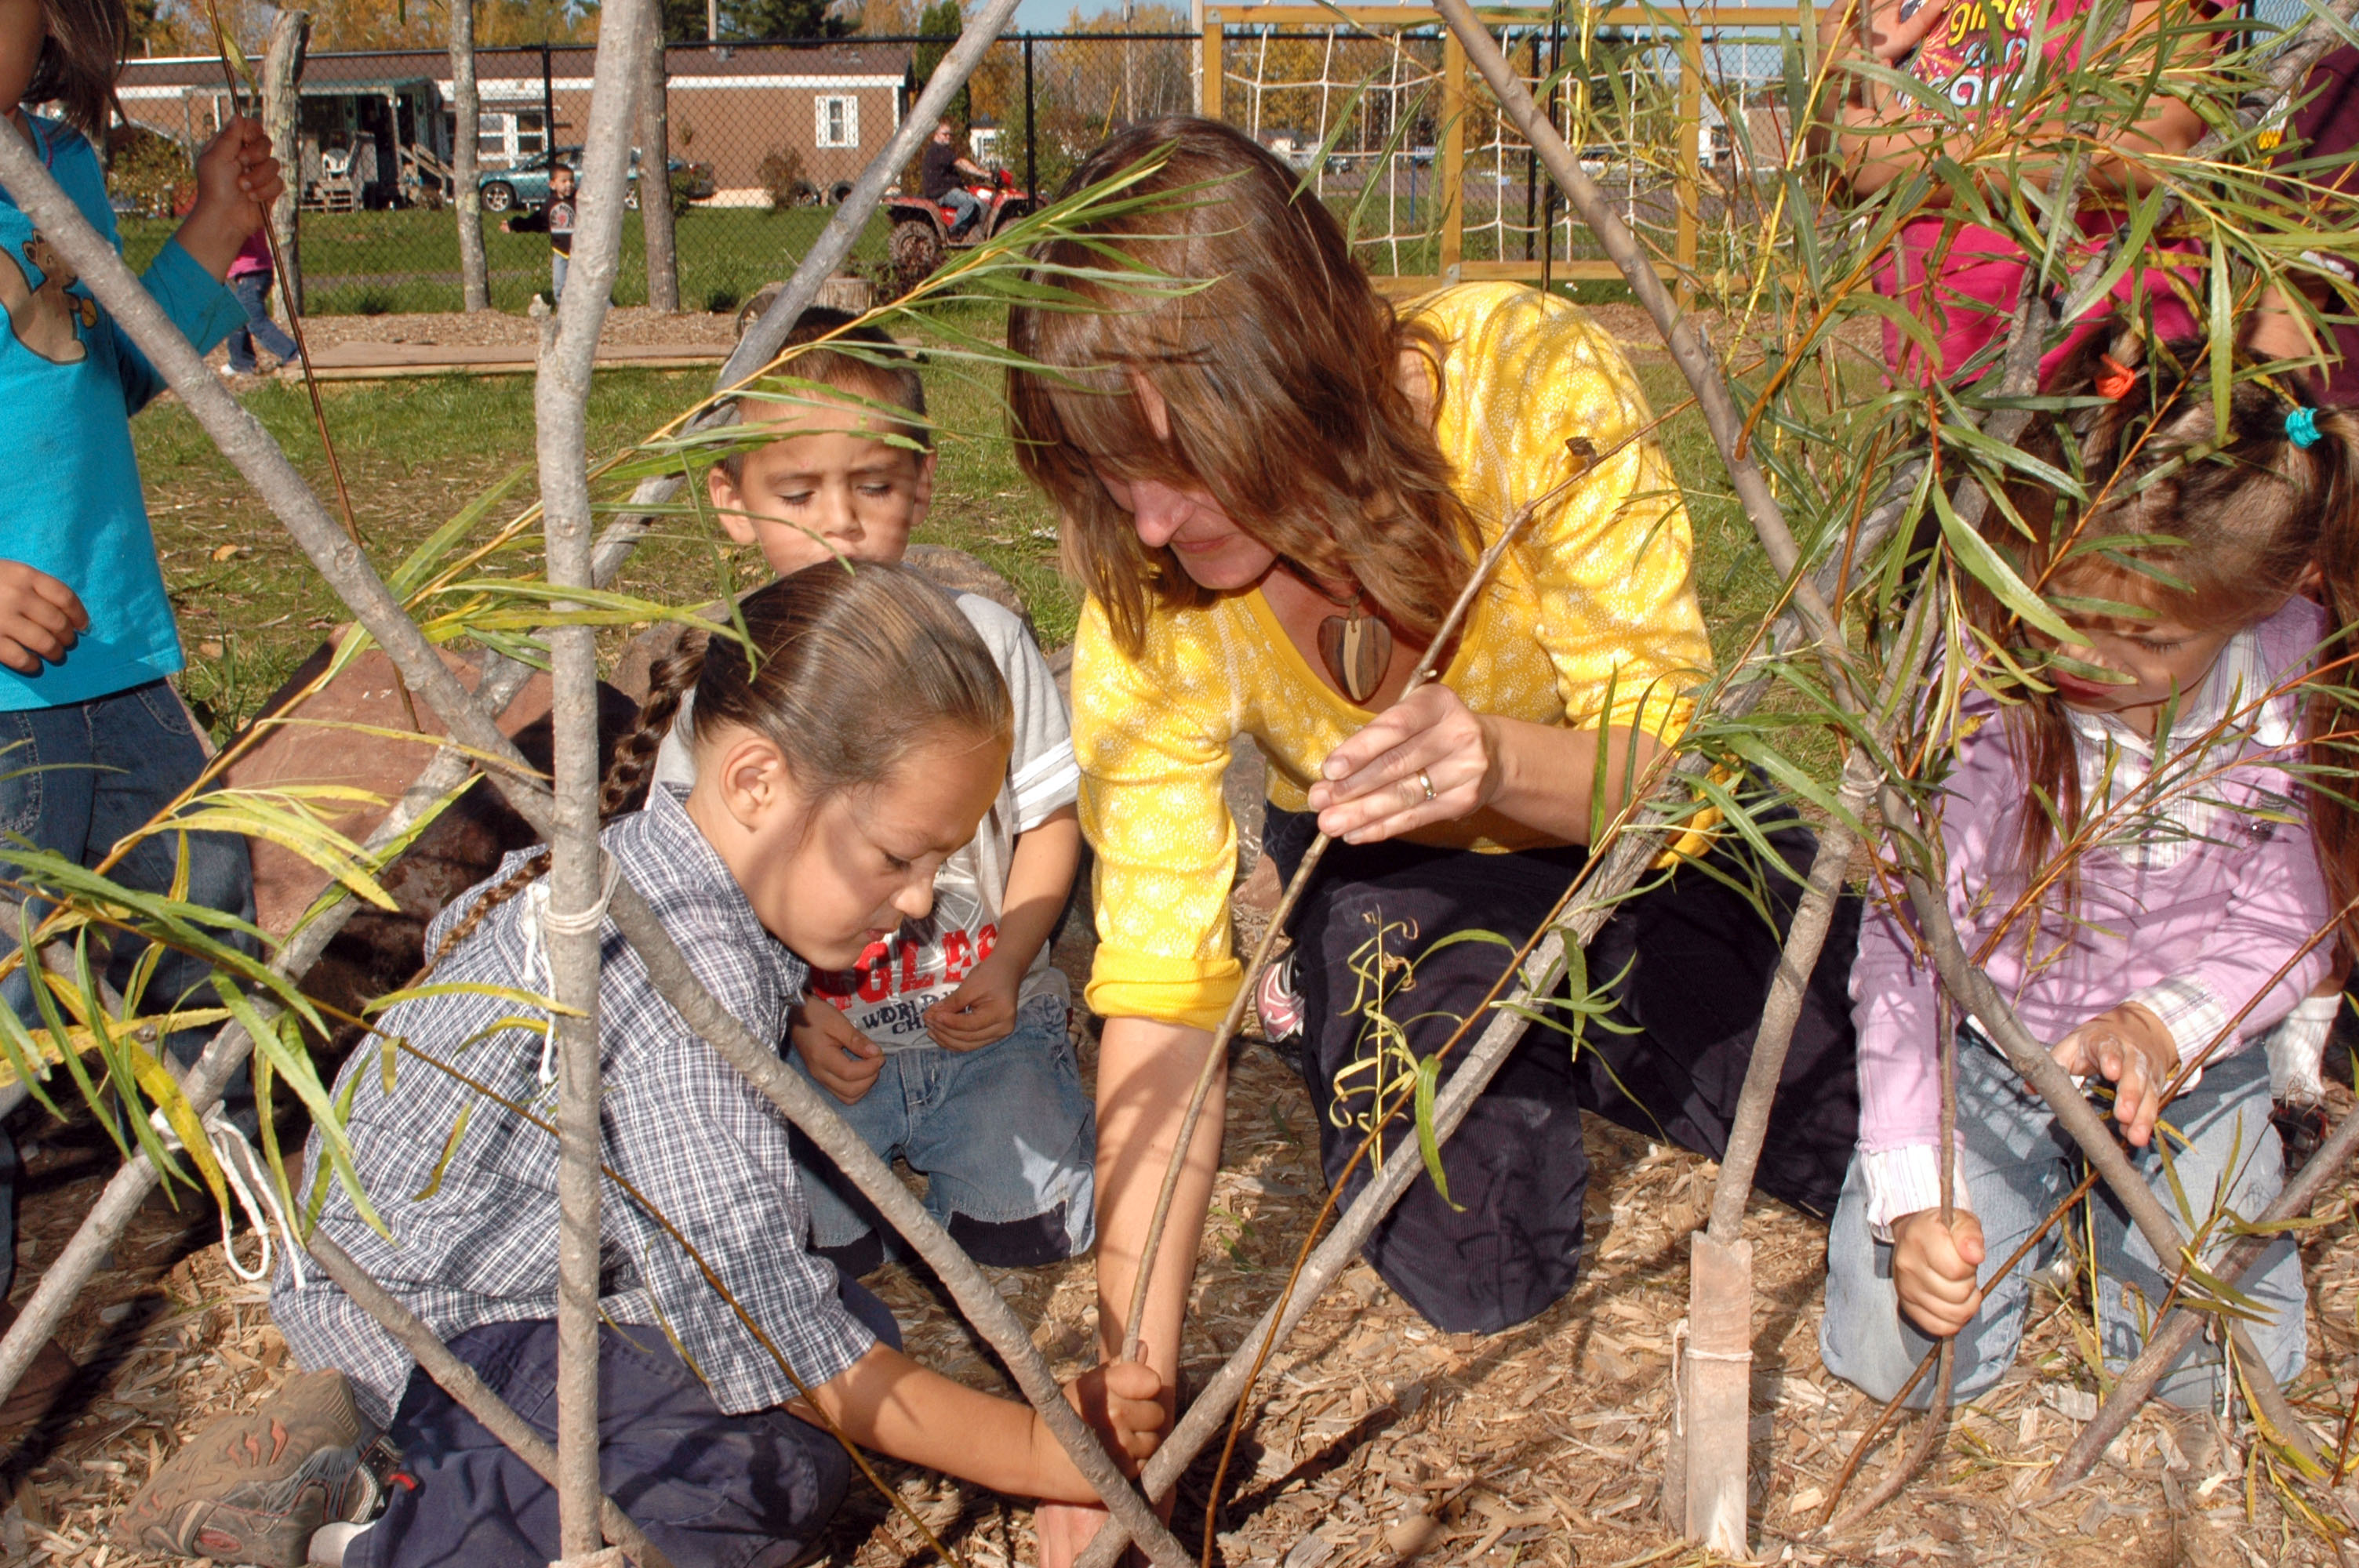 The Bad River Indian Reservation involves children in planting and creating a willow lodge. Menominee Nation has taken similar steps in involving children in similar healthy community efforts. 
Photo by: